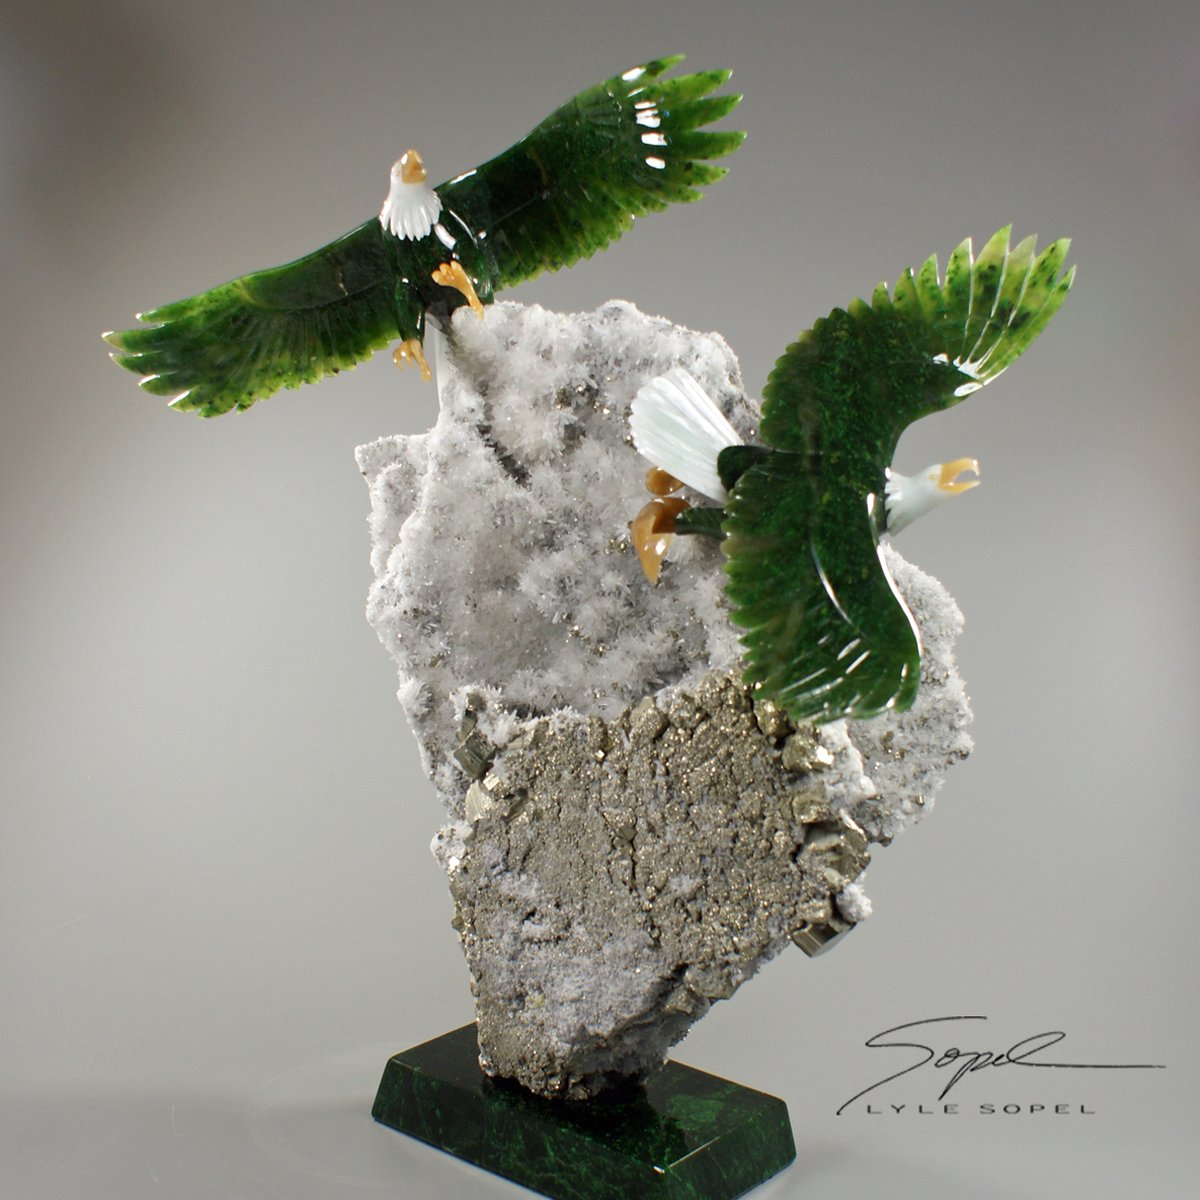 Whenever I create eagles, I feel this intense focus as I work on getting the feather pattern as close to perfection as possible. Visit sopel.com for more!

#eagle #loveeagles #jade #whitejade #classicalsculpture #luxurygemstonesculpture #crystalworks #audubon